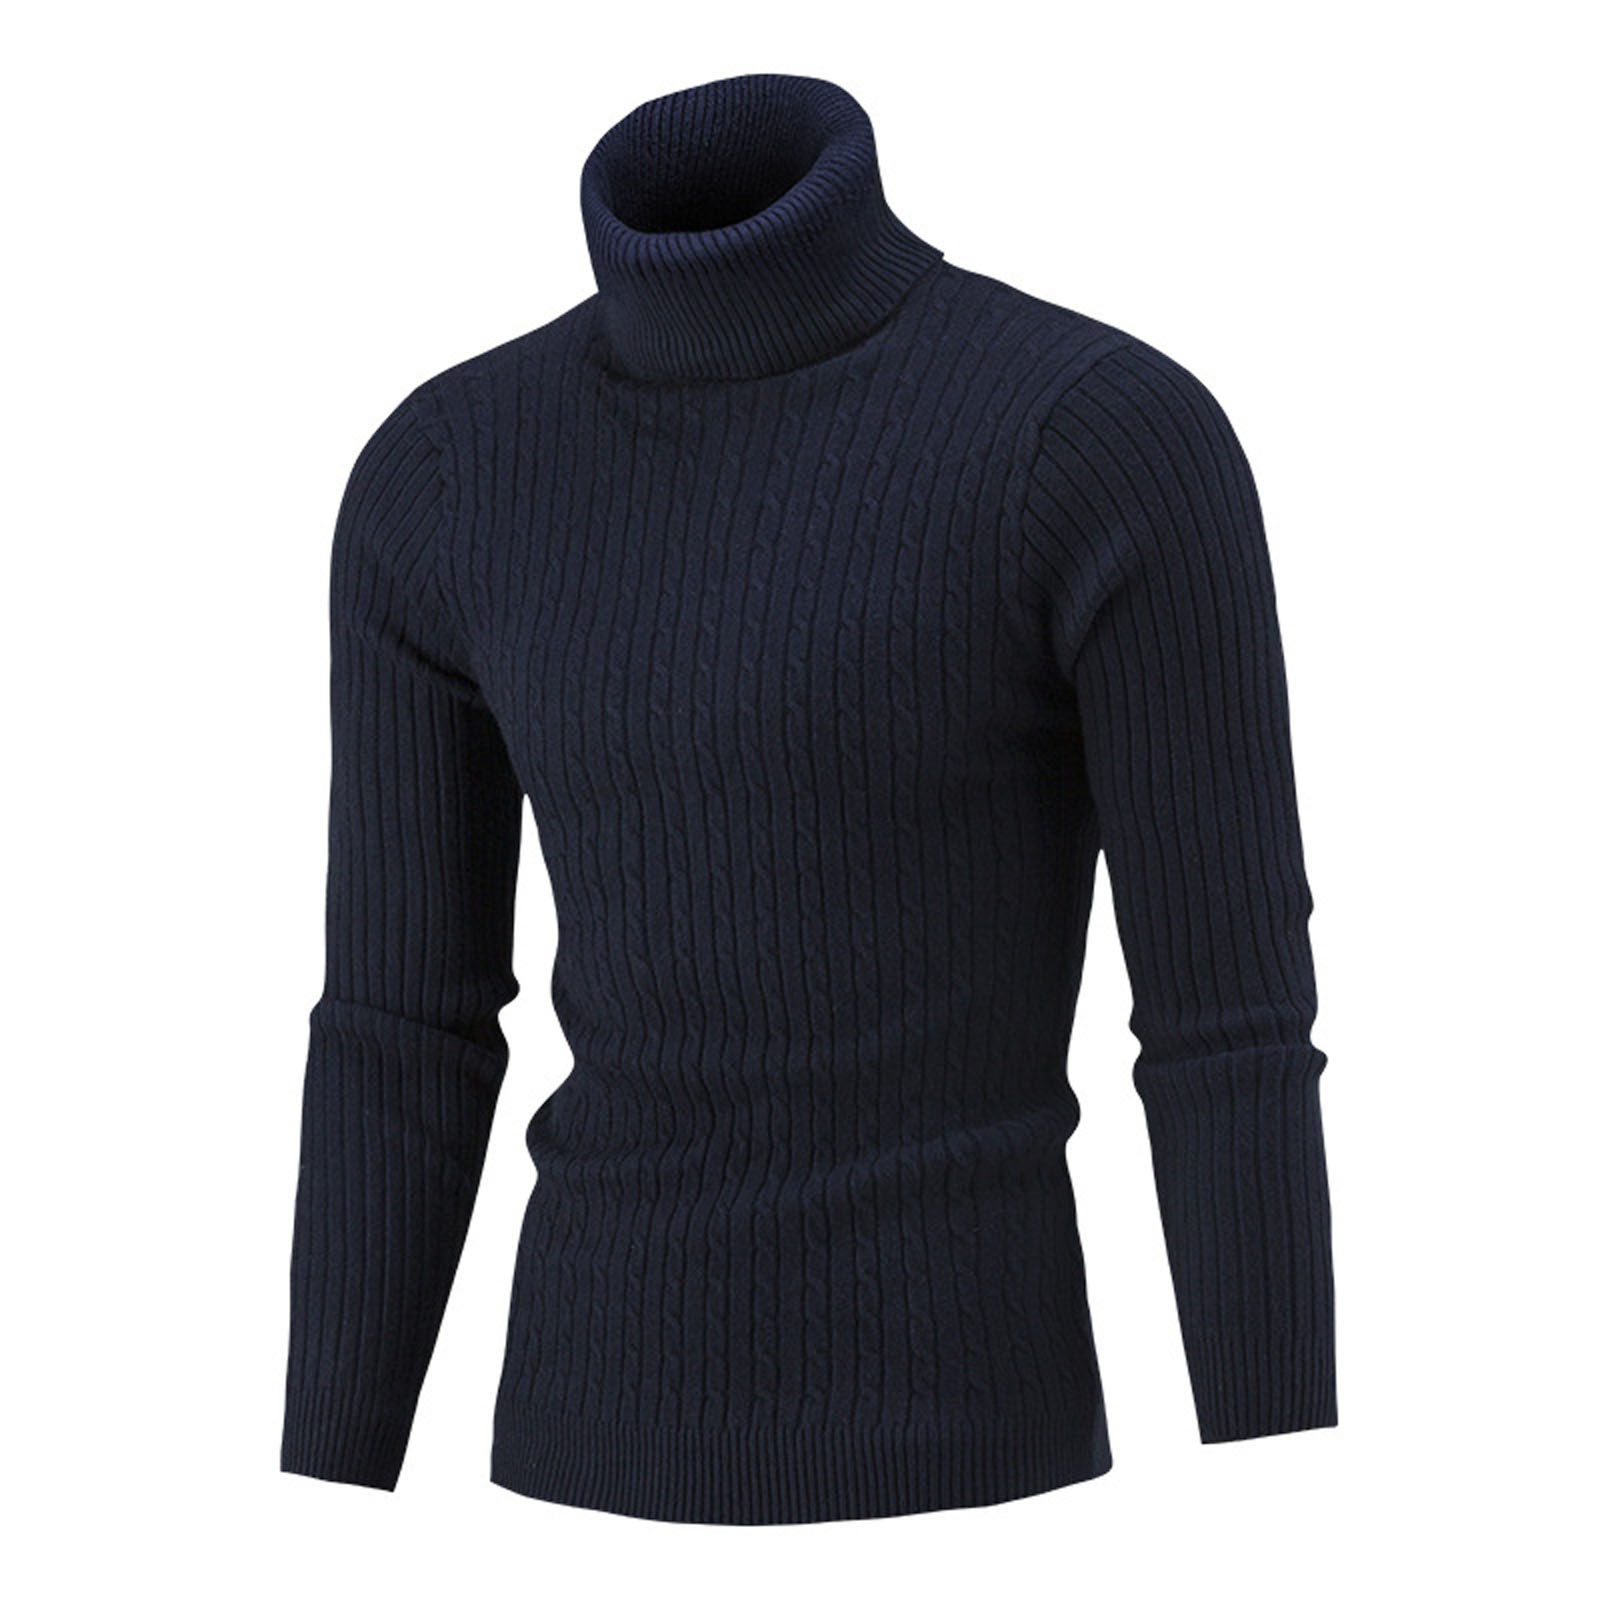 Men's Autumn Winter Casual England Style Long Sleeve Cotton Solid Color Turtelneck Sweater Pullover Sweaters Tops